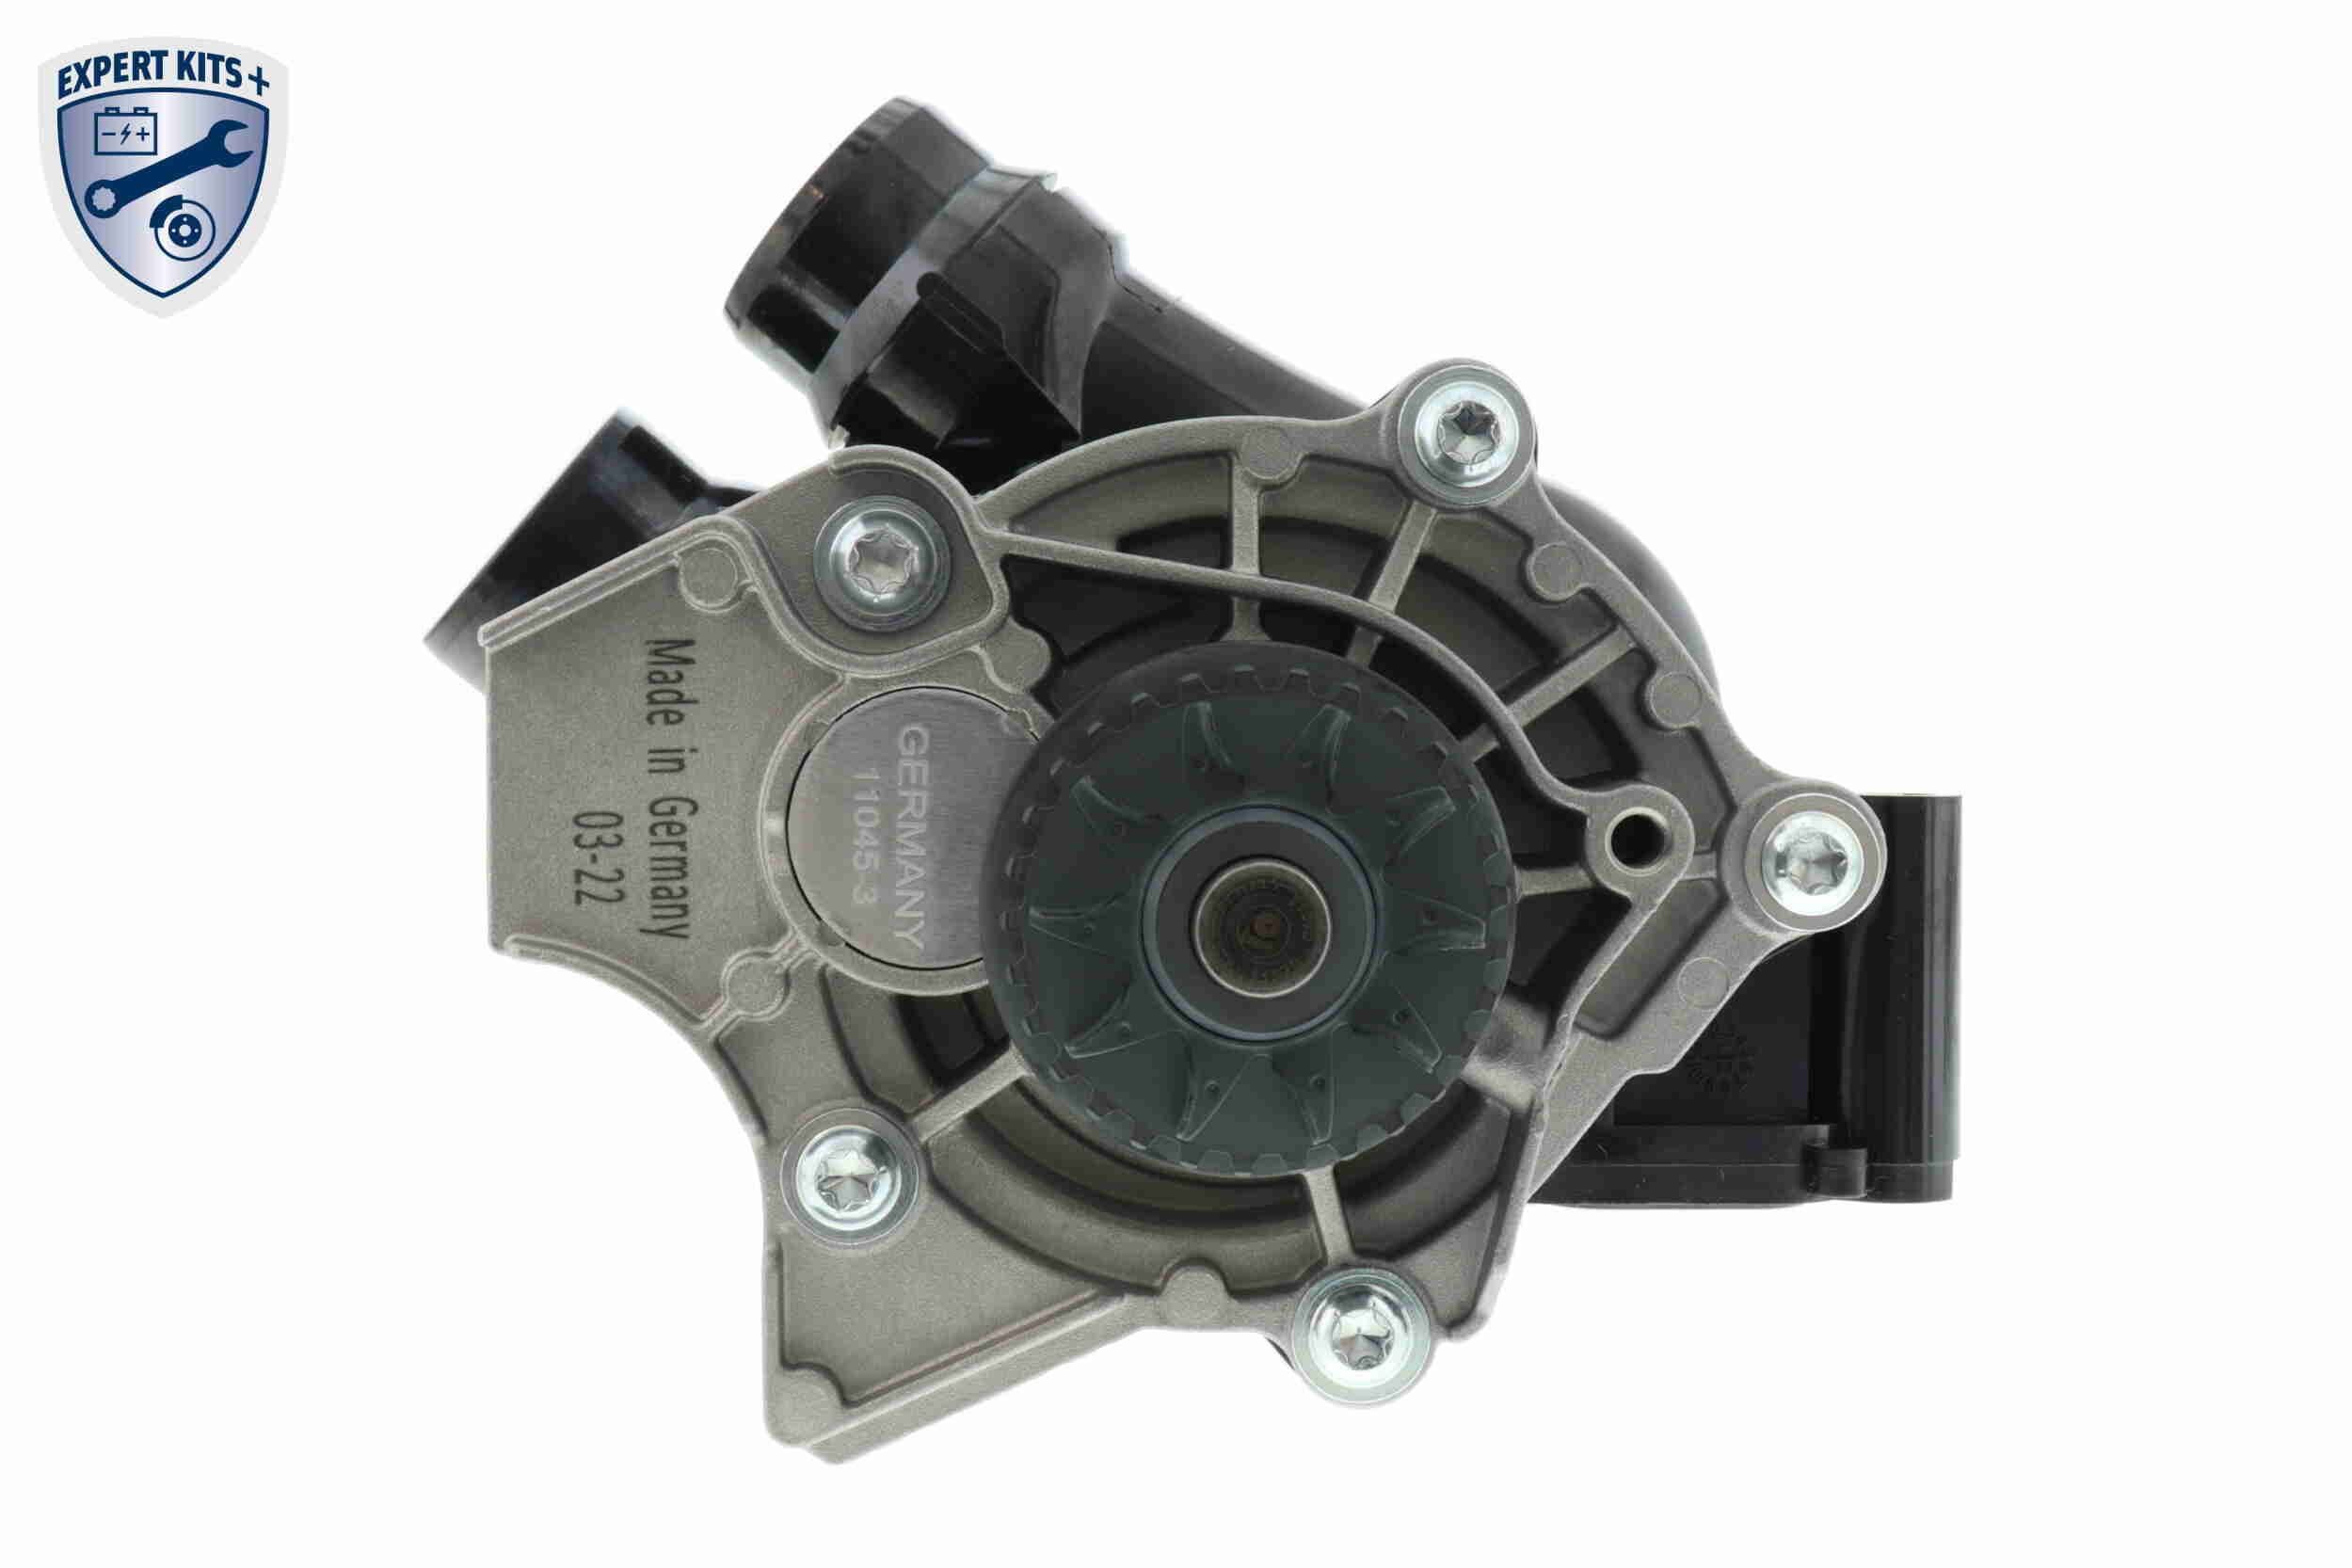 V10-50091 Water pumps V10-50091 VAICO Number of Teeth: 29, with seal, with thermostat, with bracket, without sensor, with coolant regulator, Grey Cast Iron, Metal, EXPERT KITS +, with housing